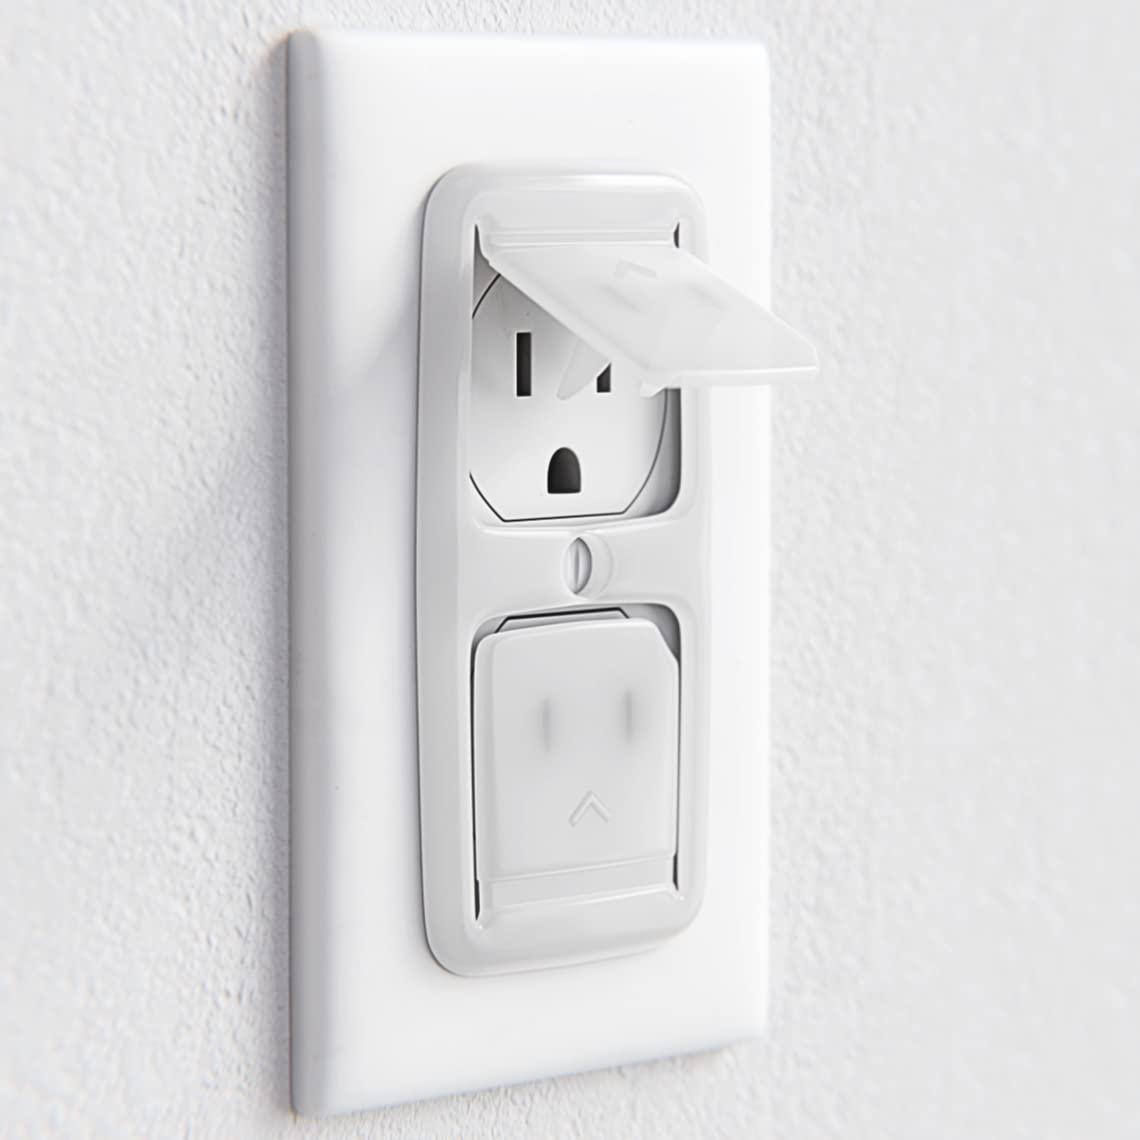 Block-It-Socket - Outlet Covers Baby Proofing (Made in USA) Never Lose an  Outlet Plug Cover Again, Stays Attached to Face Plate, No Choking Hazard -  Child Safety Switch (8 Pack - 16 Receptacles) Clear